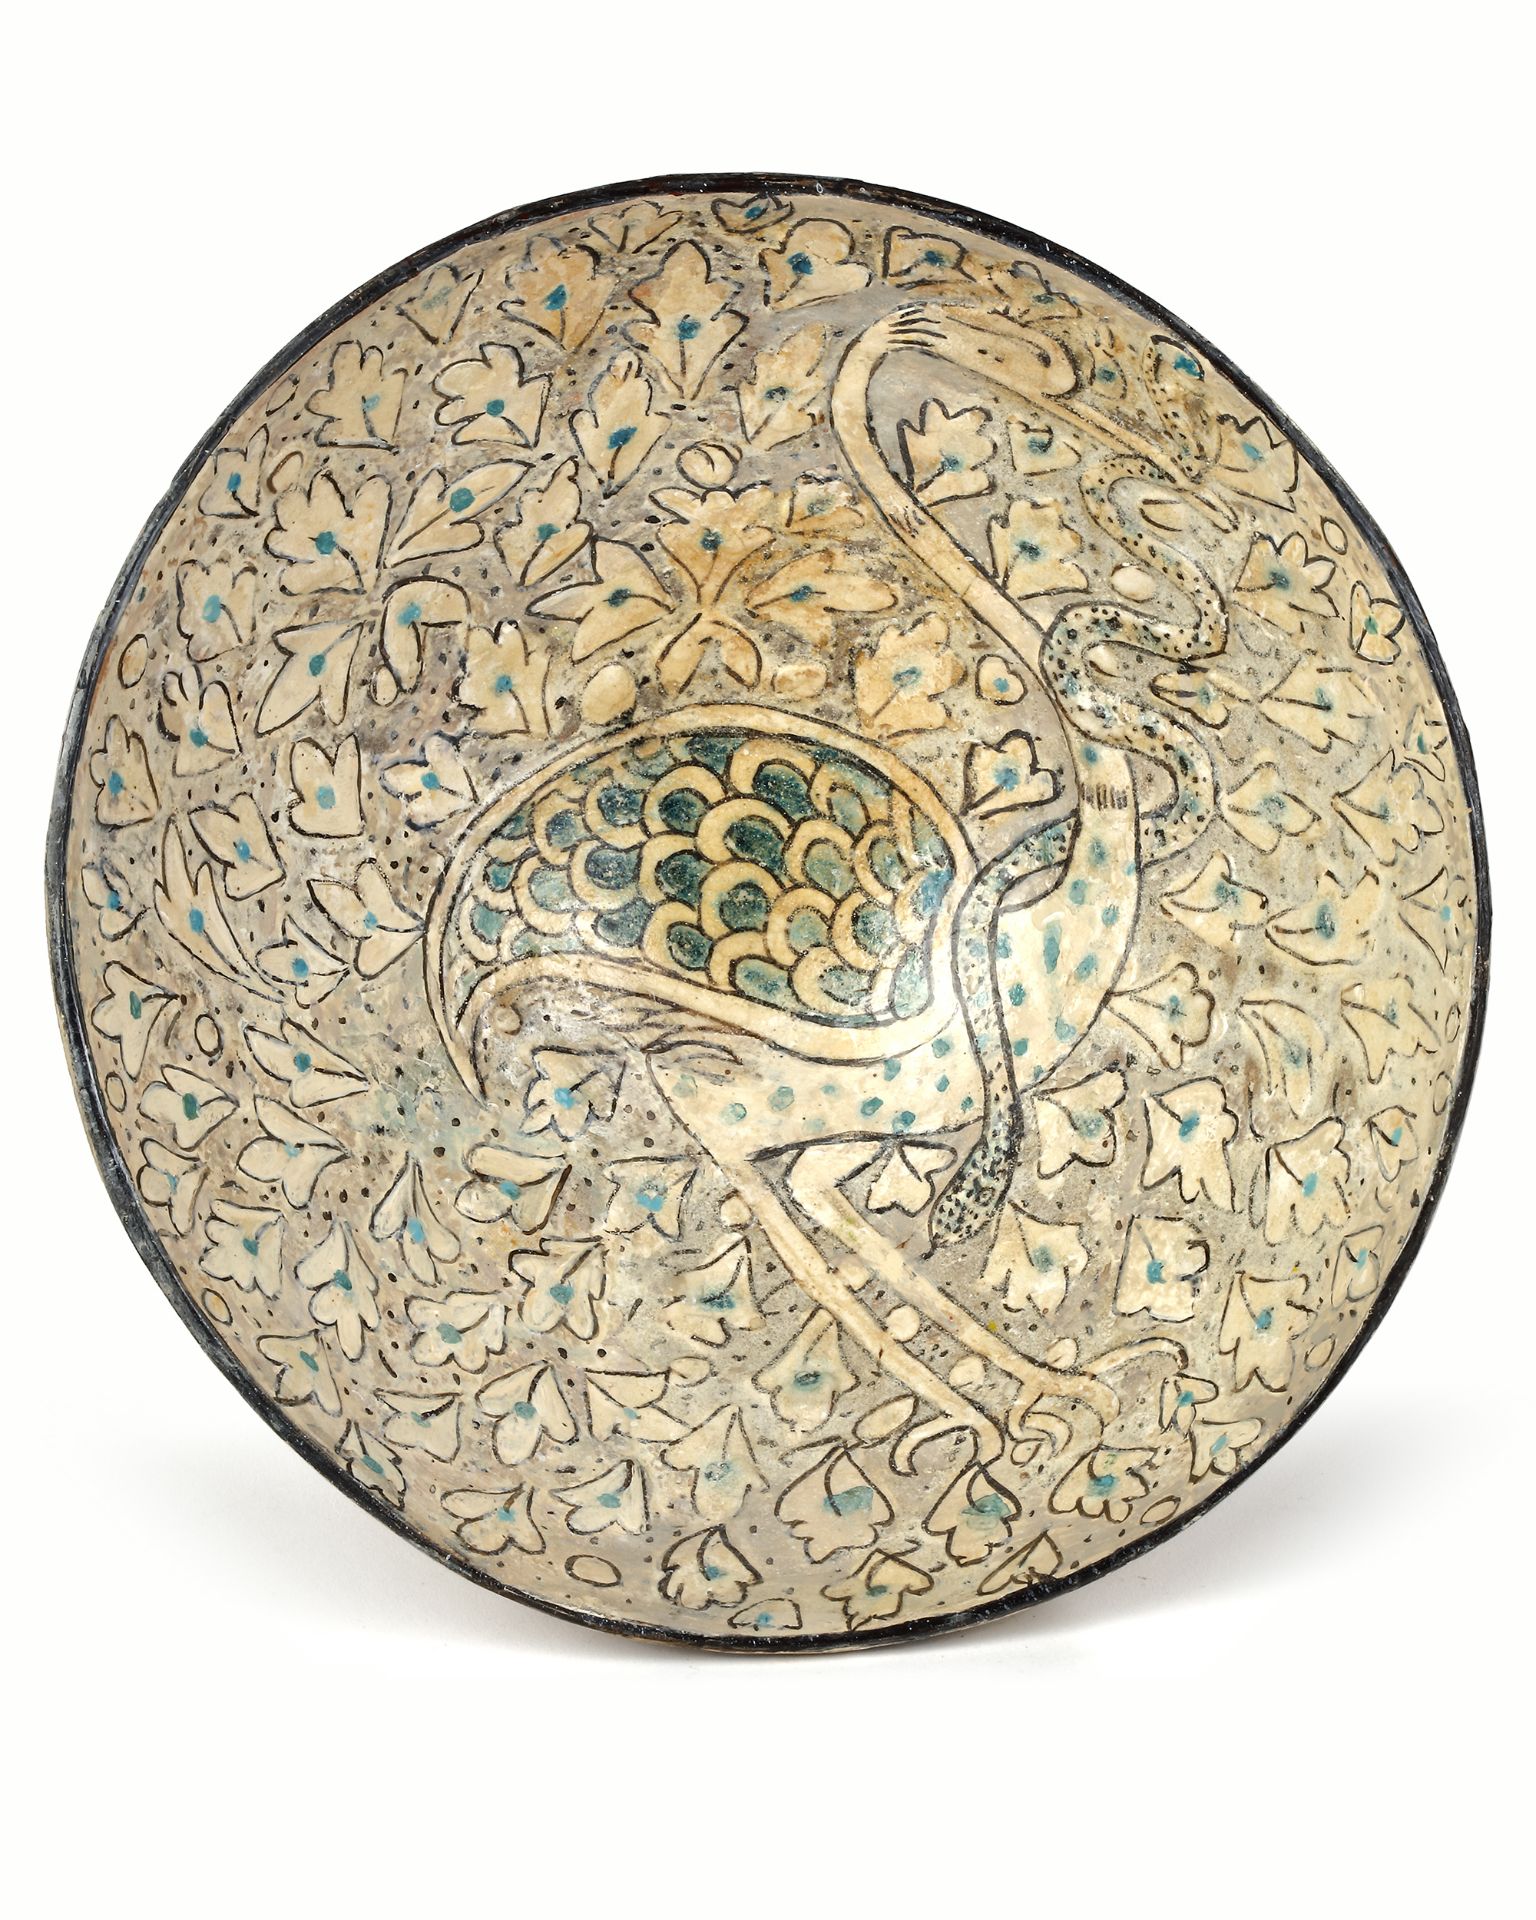 AN ISLAMIC BOWL DEPICTING A BIRD, SULTANABAD WARE, 12TH-13TH CENTURY - Image 2 of 10